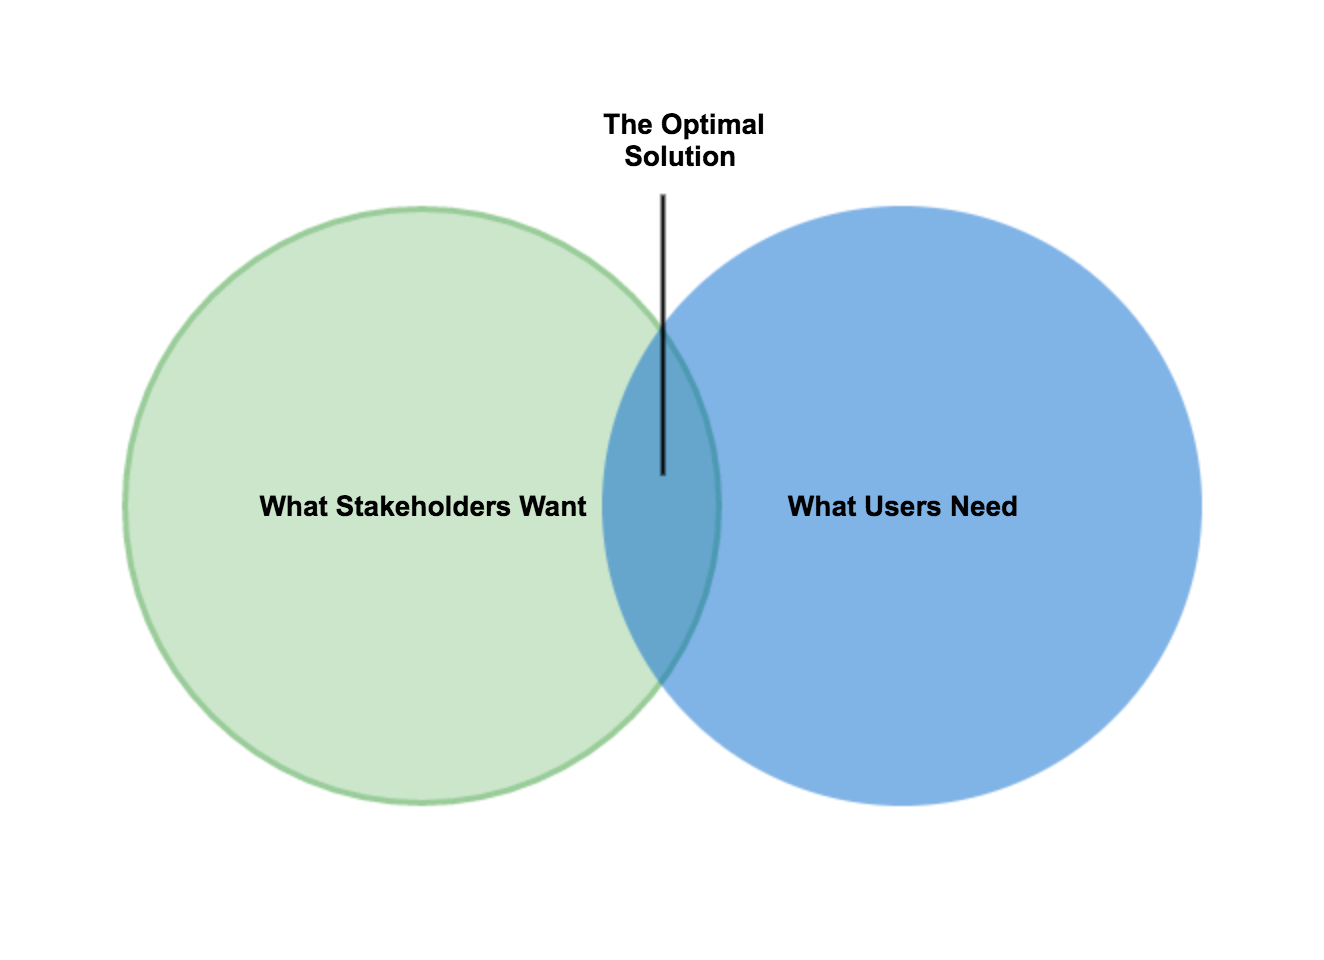 A Venn Diagram with The Optimal Solution between What Stakeholder Want and What Users Need.